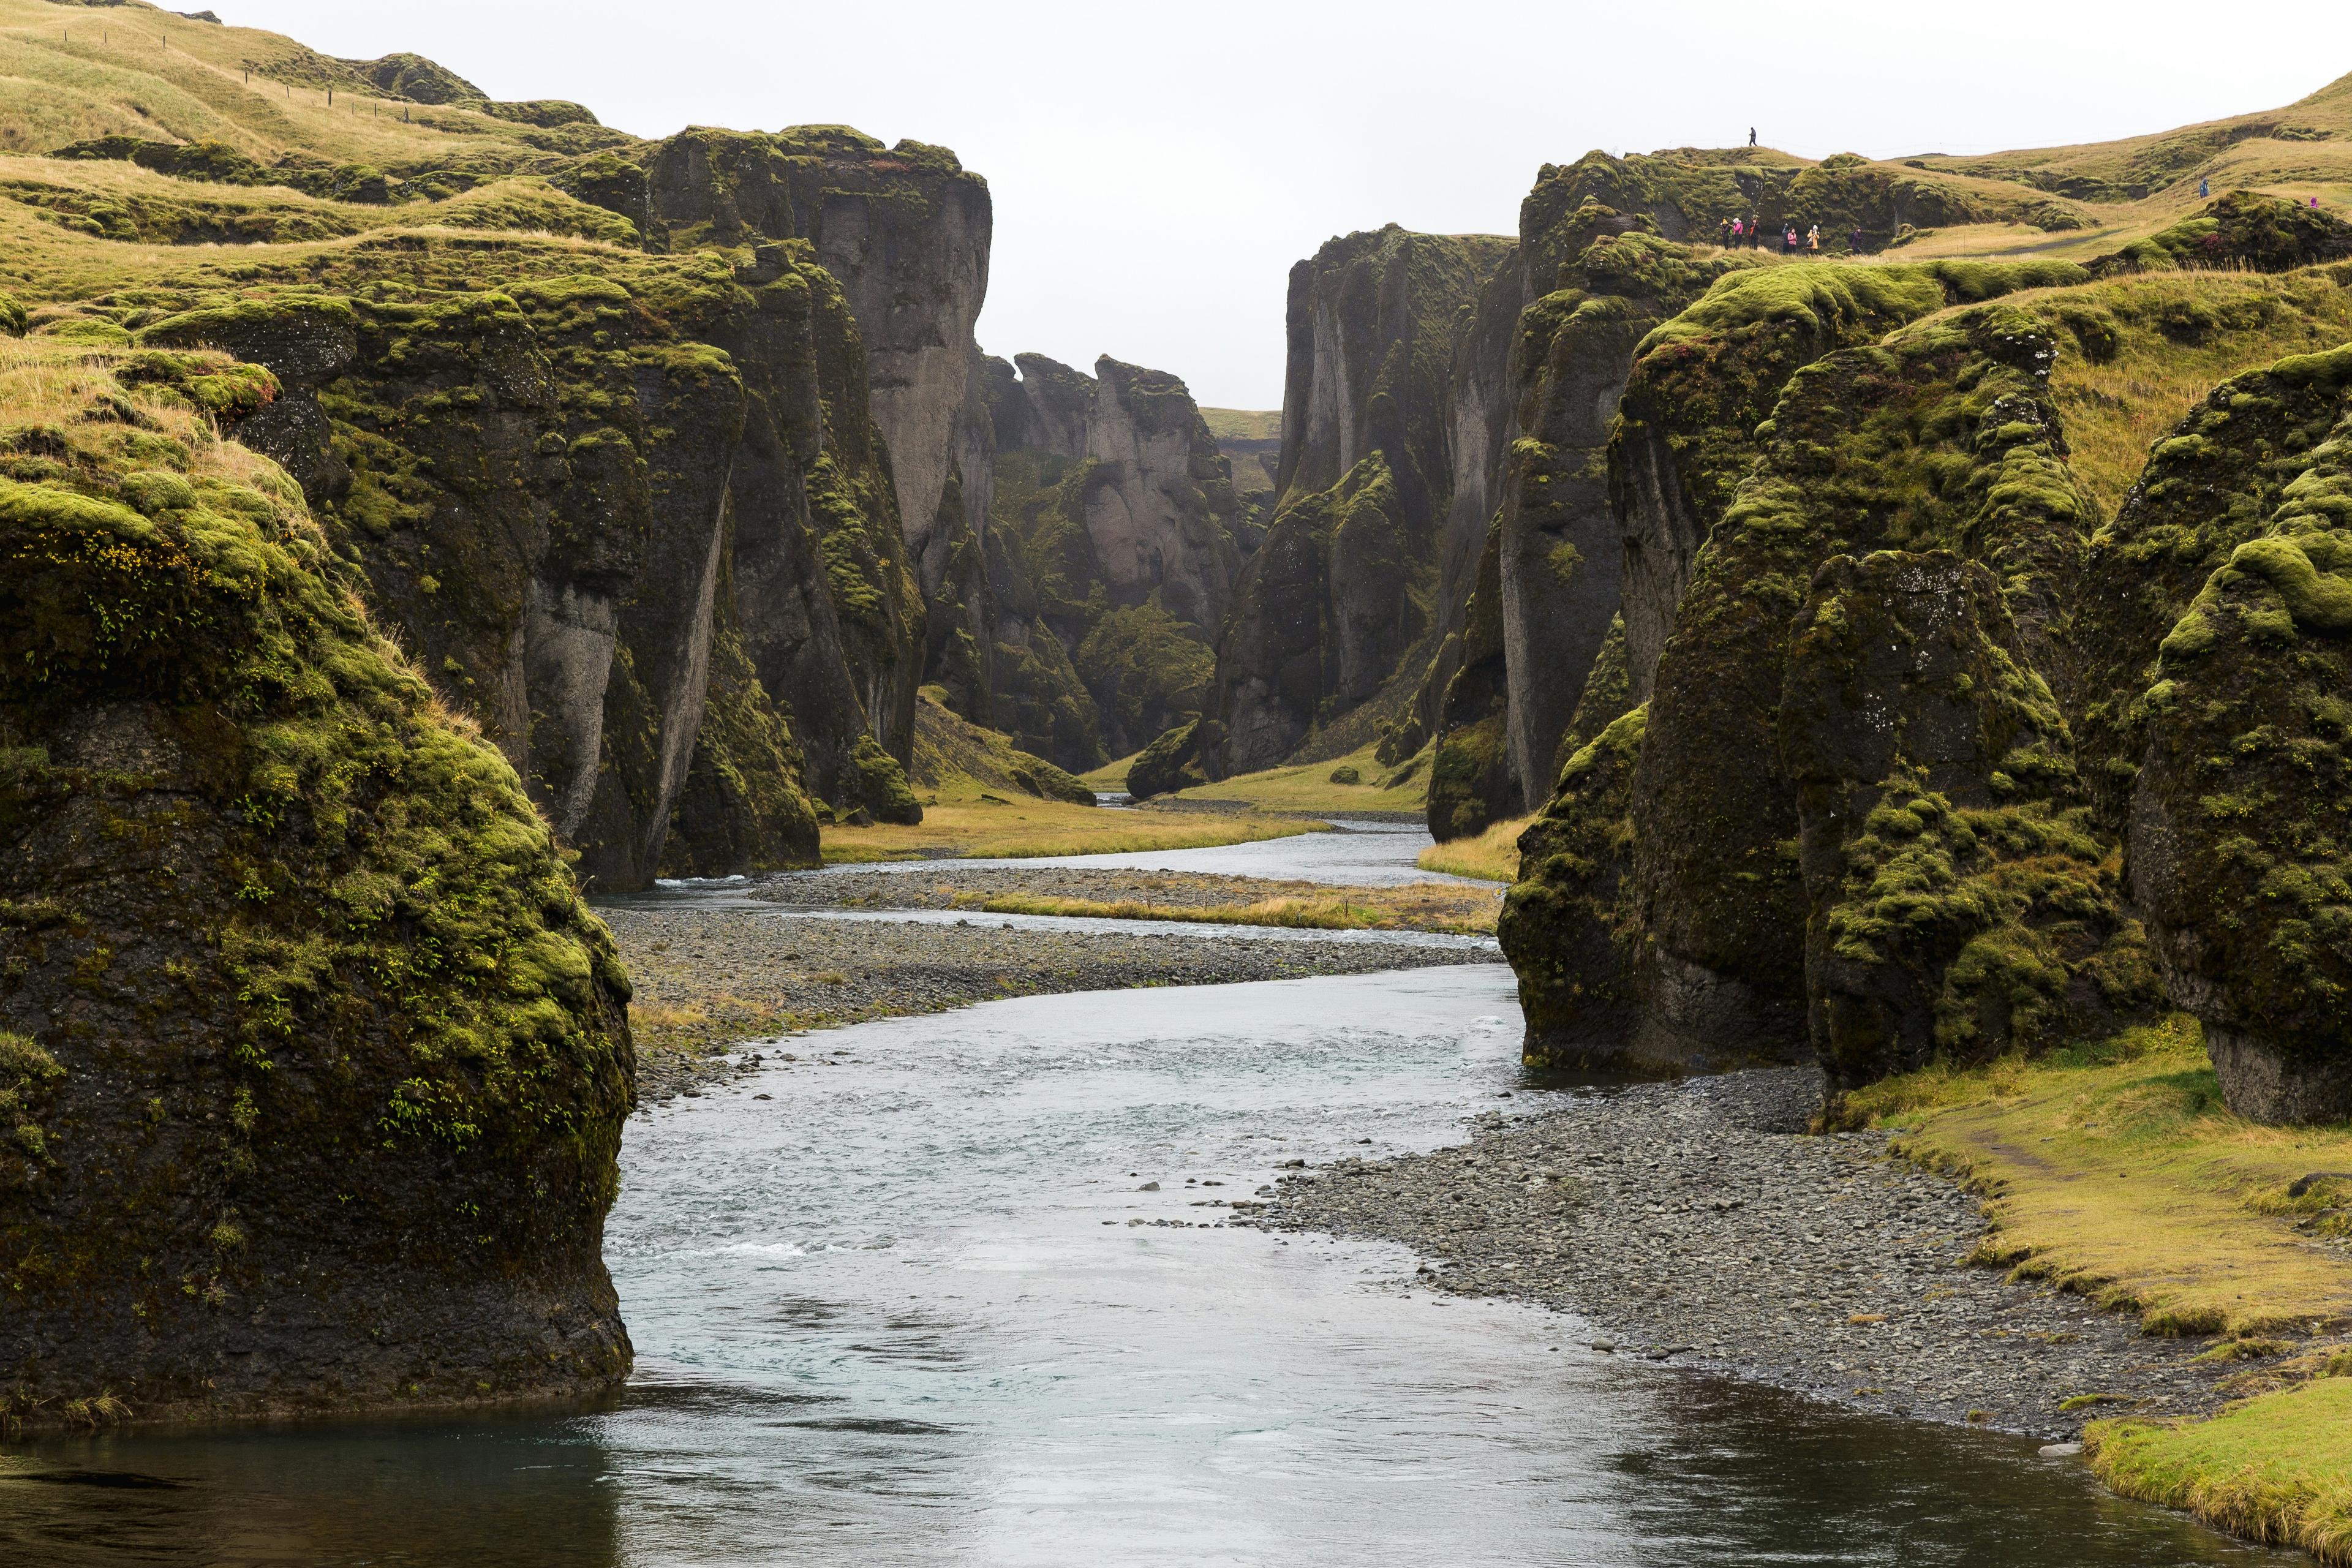 A tranquil river meandering through a dramatic, moss-covered canyon under a cloudy sky.